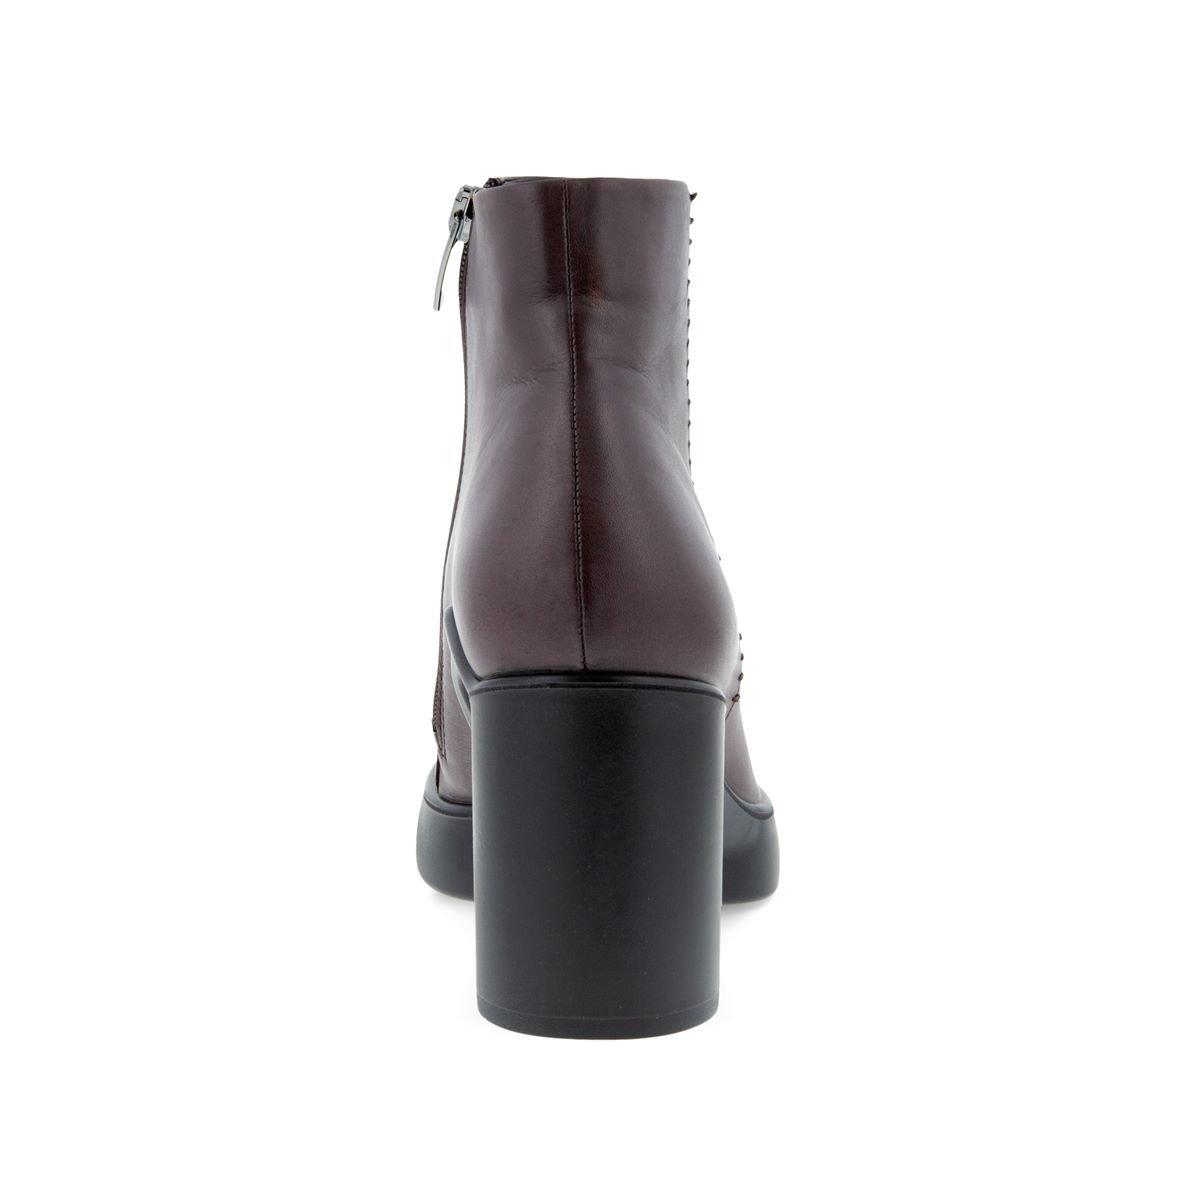 GIÀY BOOT ECCO NỮ SHAPE SCULPTED MOTION 55